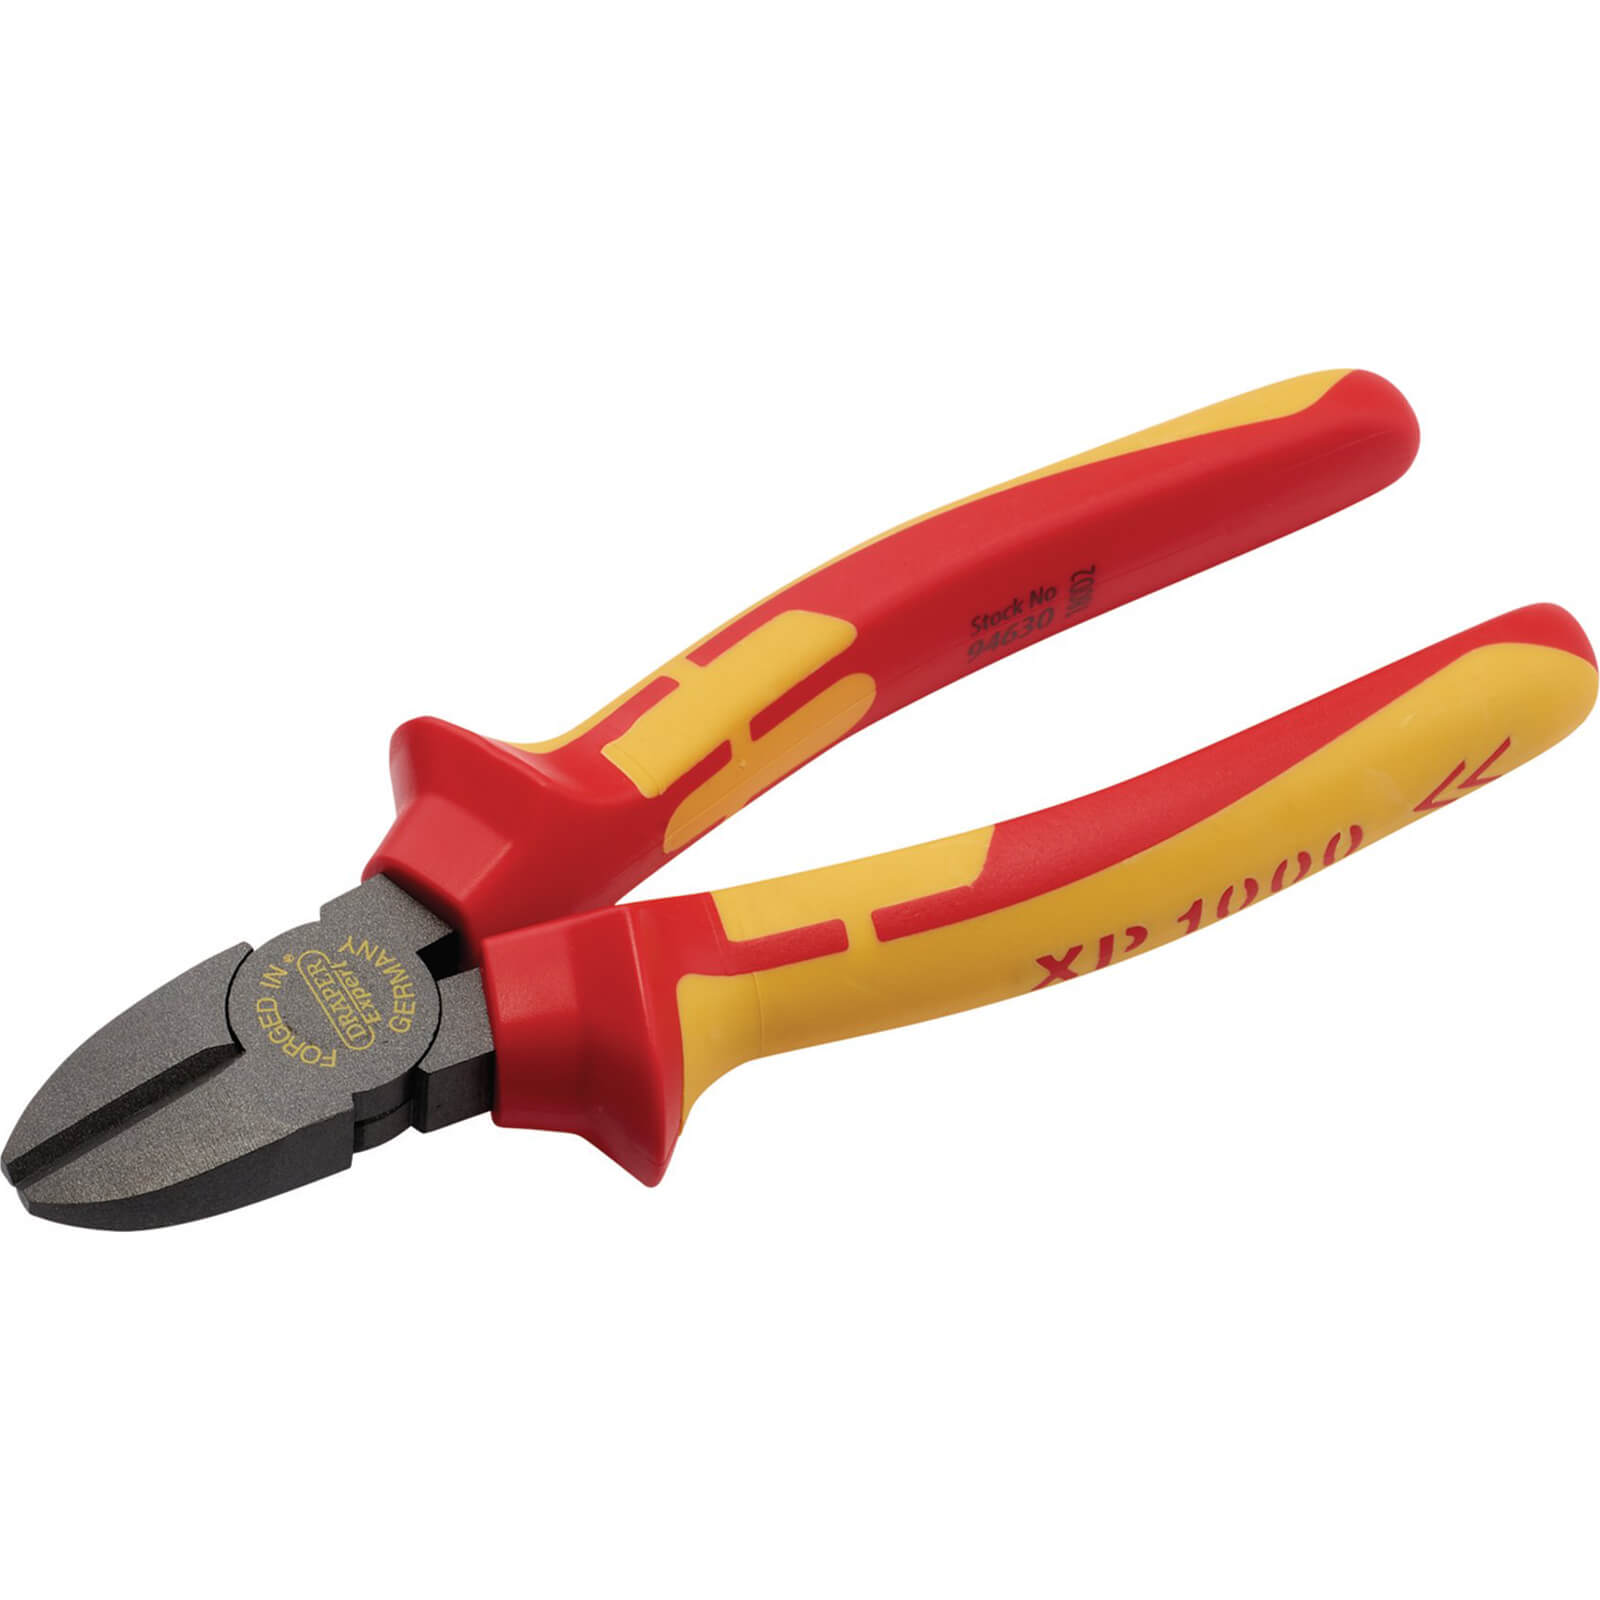 Photo of Draper Xp1000 Vde Insulated Diagonal Side Cutters 180mm